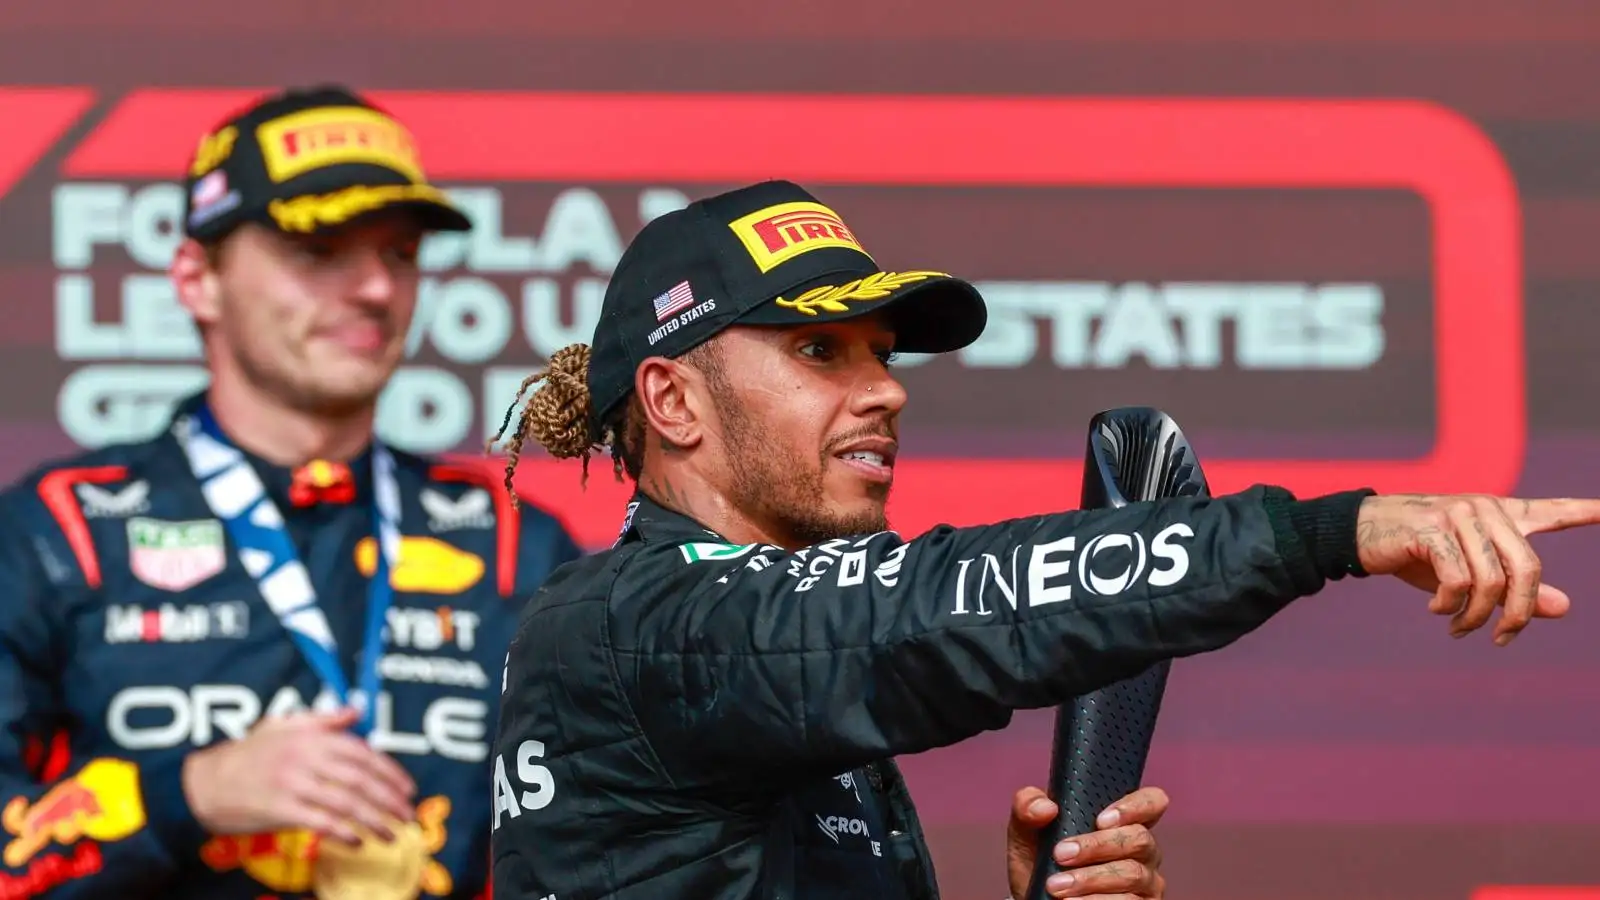 Mercedes driver Lewis Hamilton in front of Red Bull driver Max Verstappen on the podium.